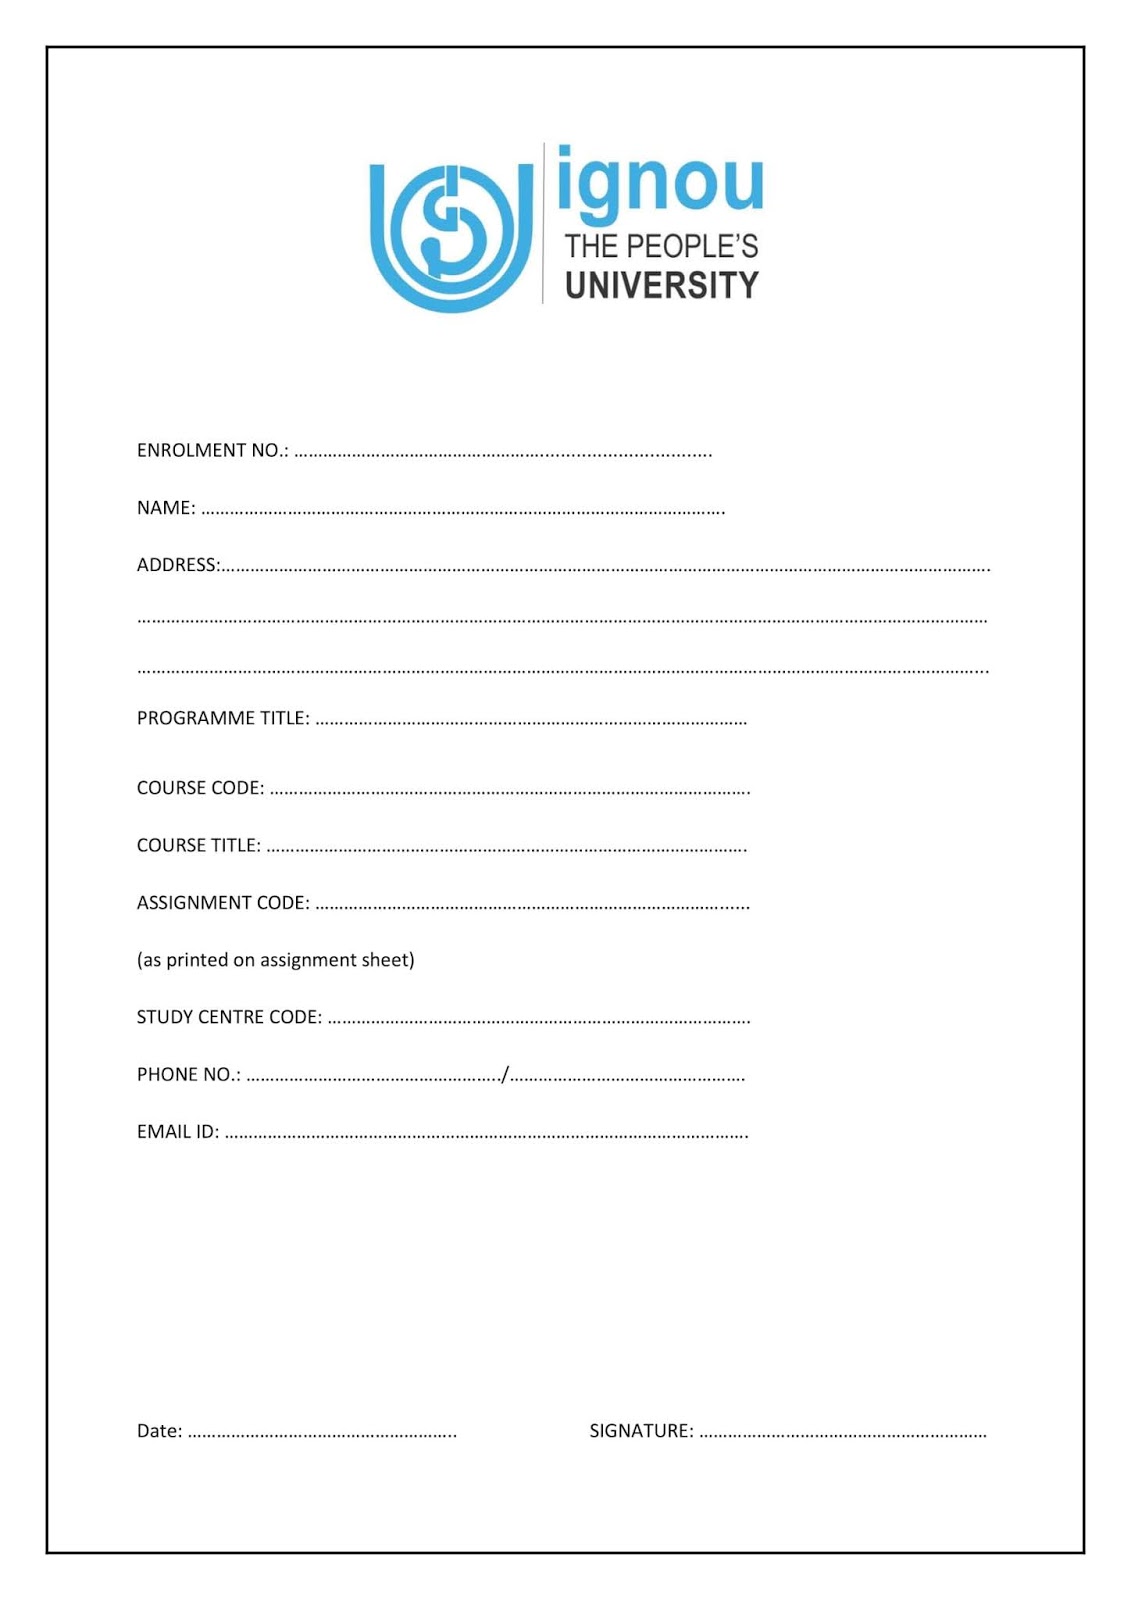 ignou assignment format front page pdf